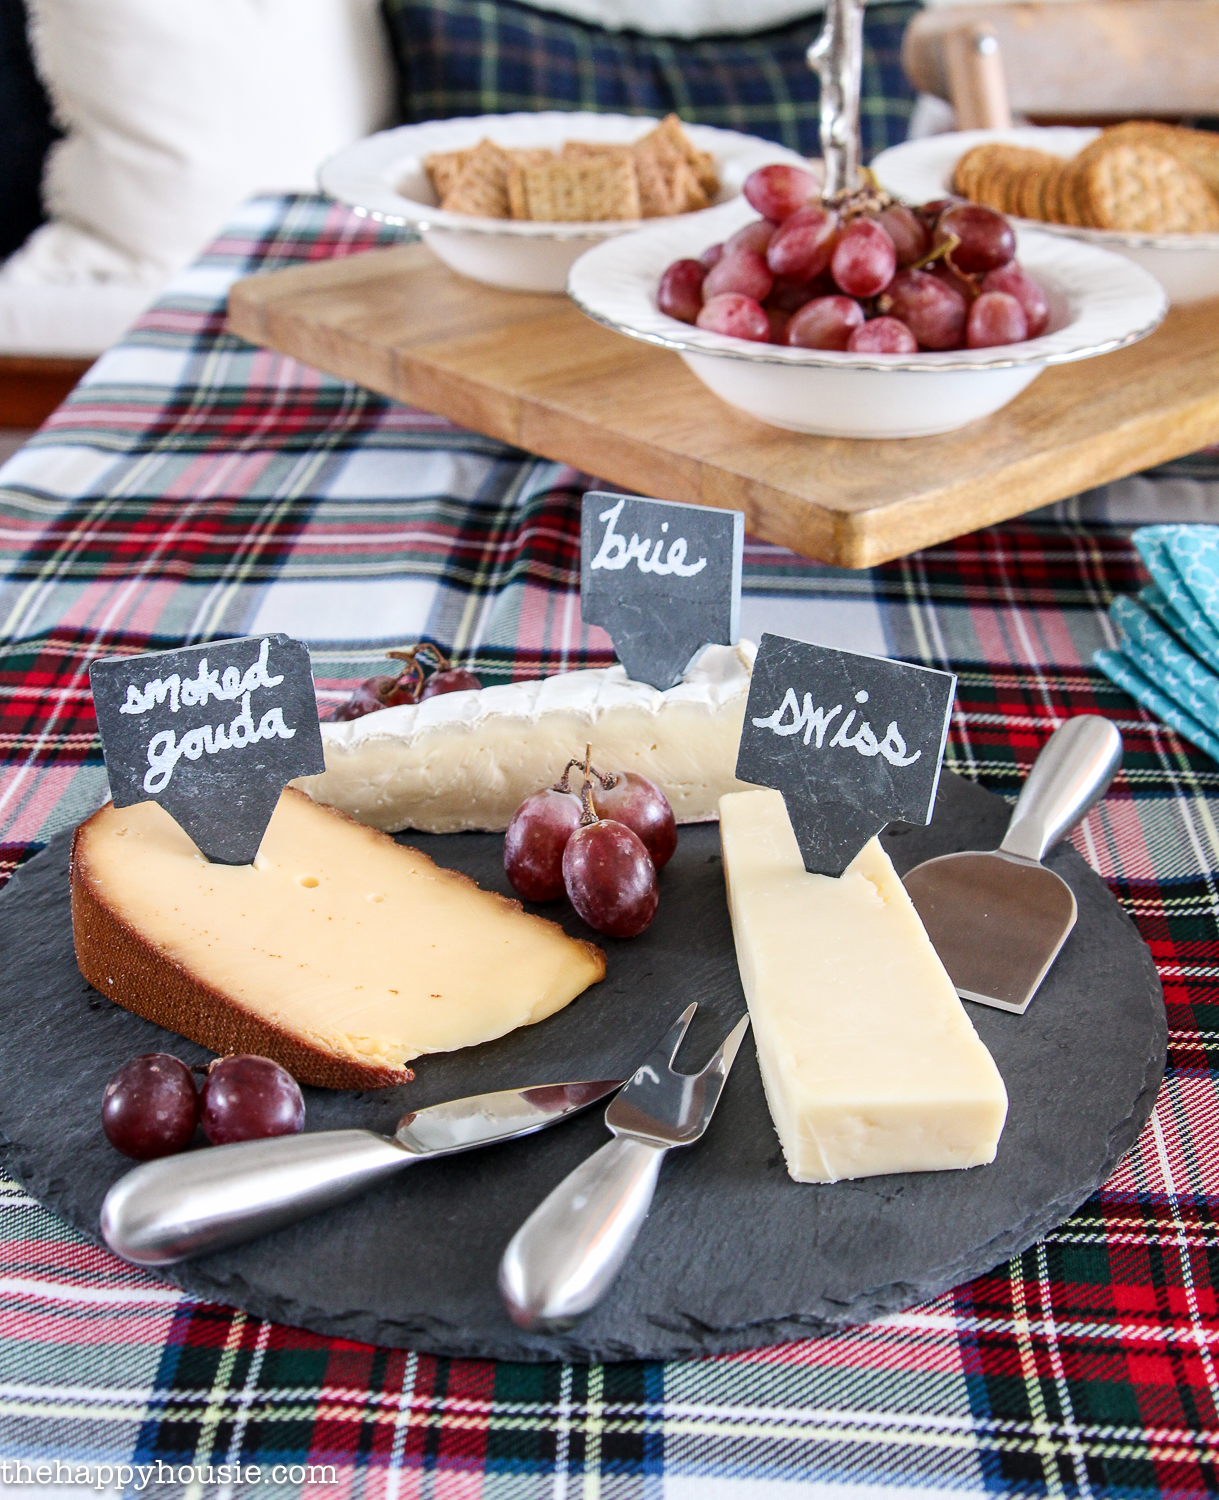 A cheese plate with signs stating what the cheeses are on a plate.